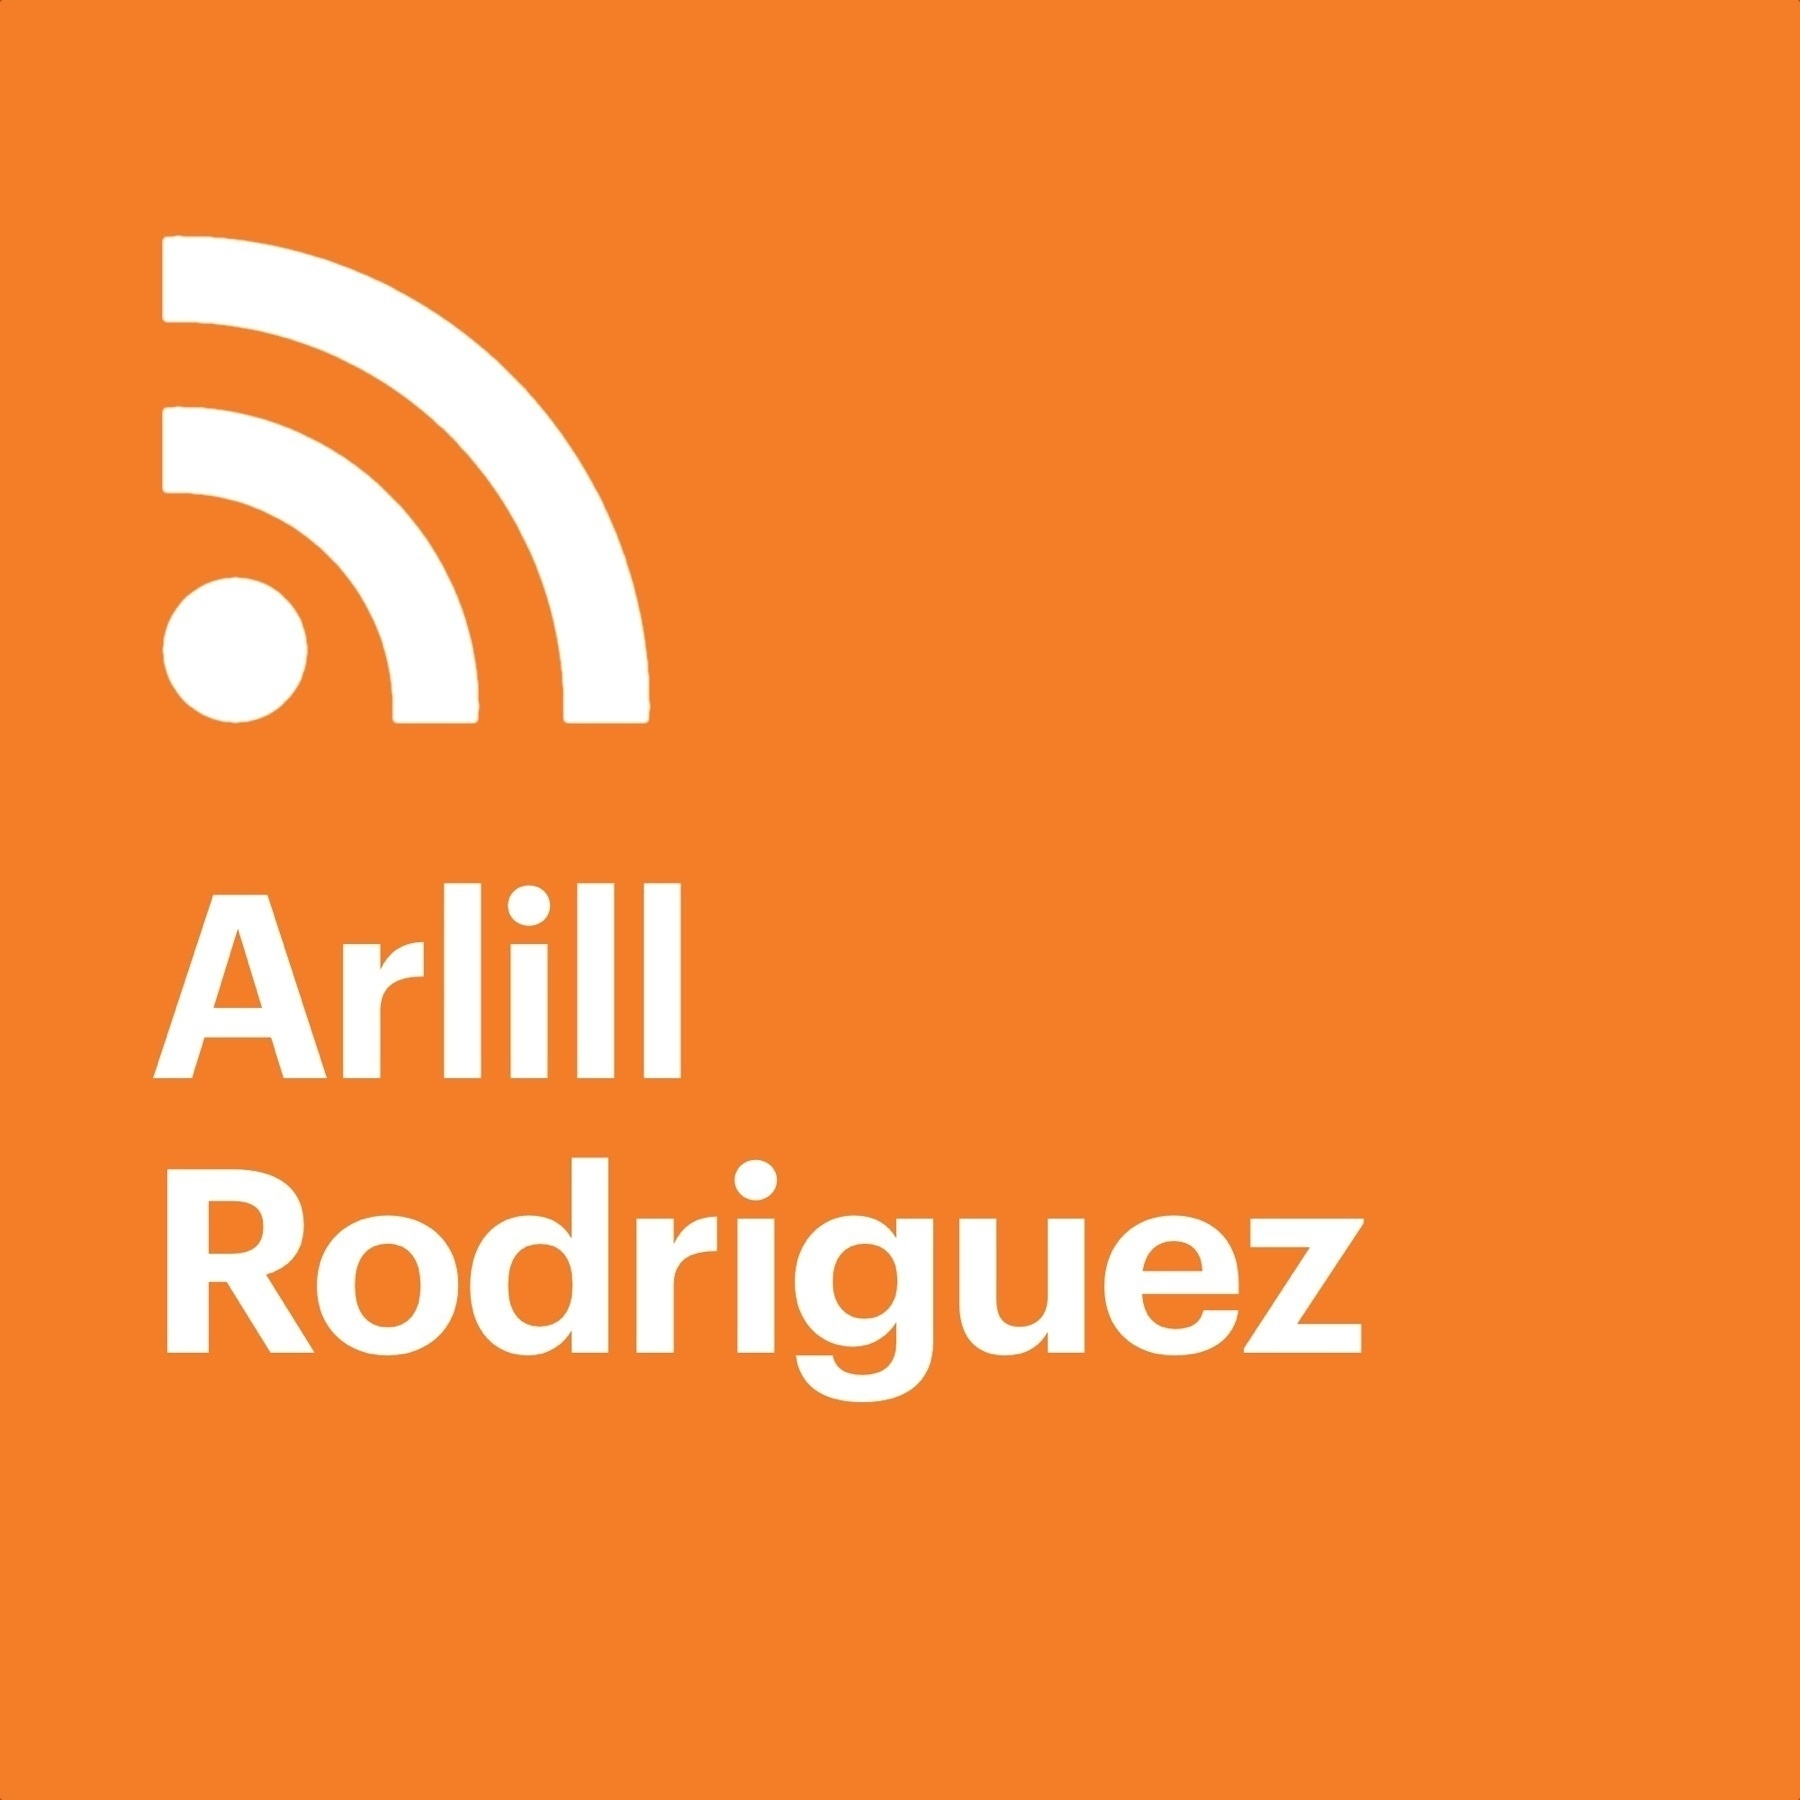 The name Arlill Rodriguez under an RSS icon